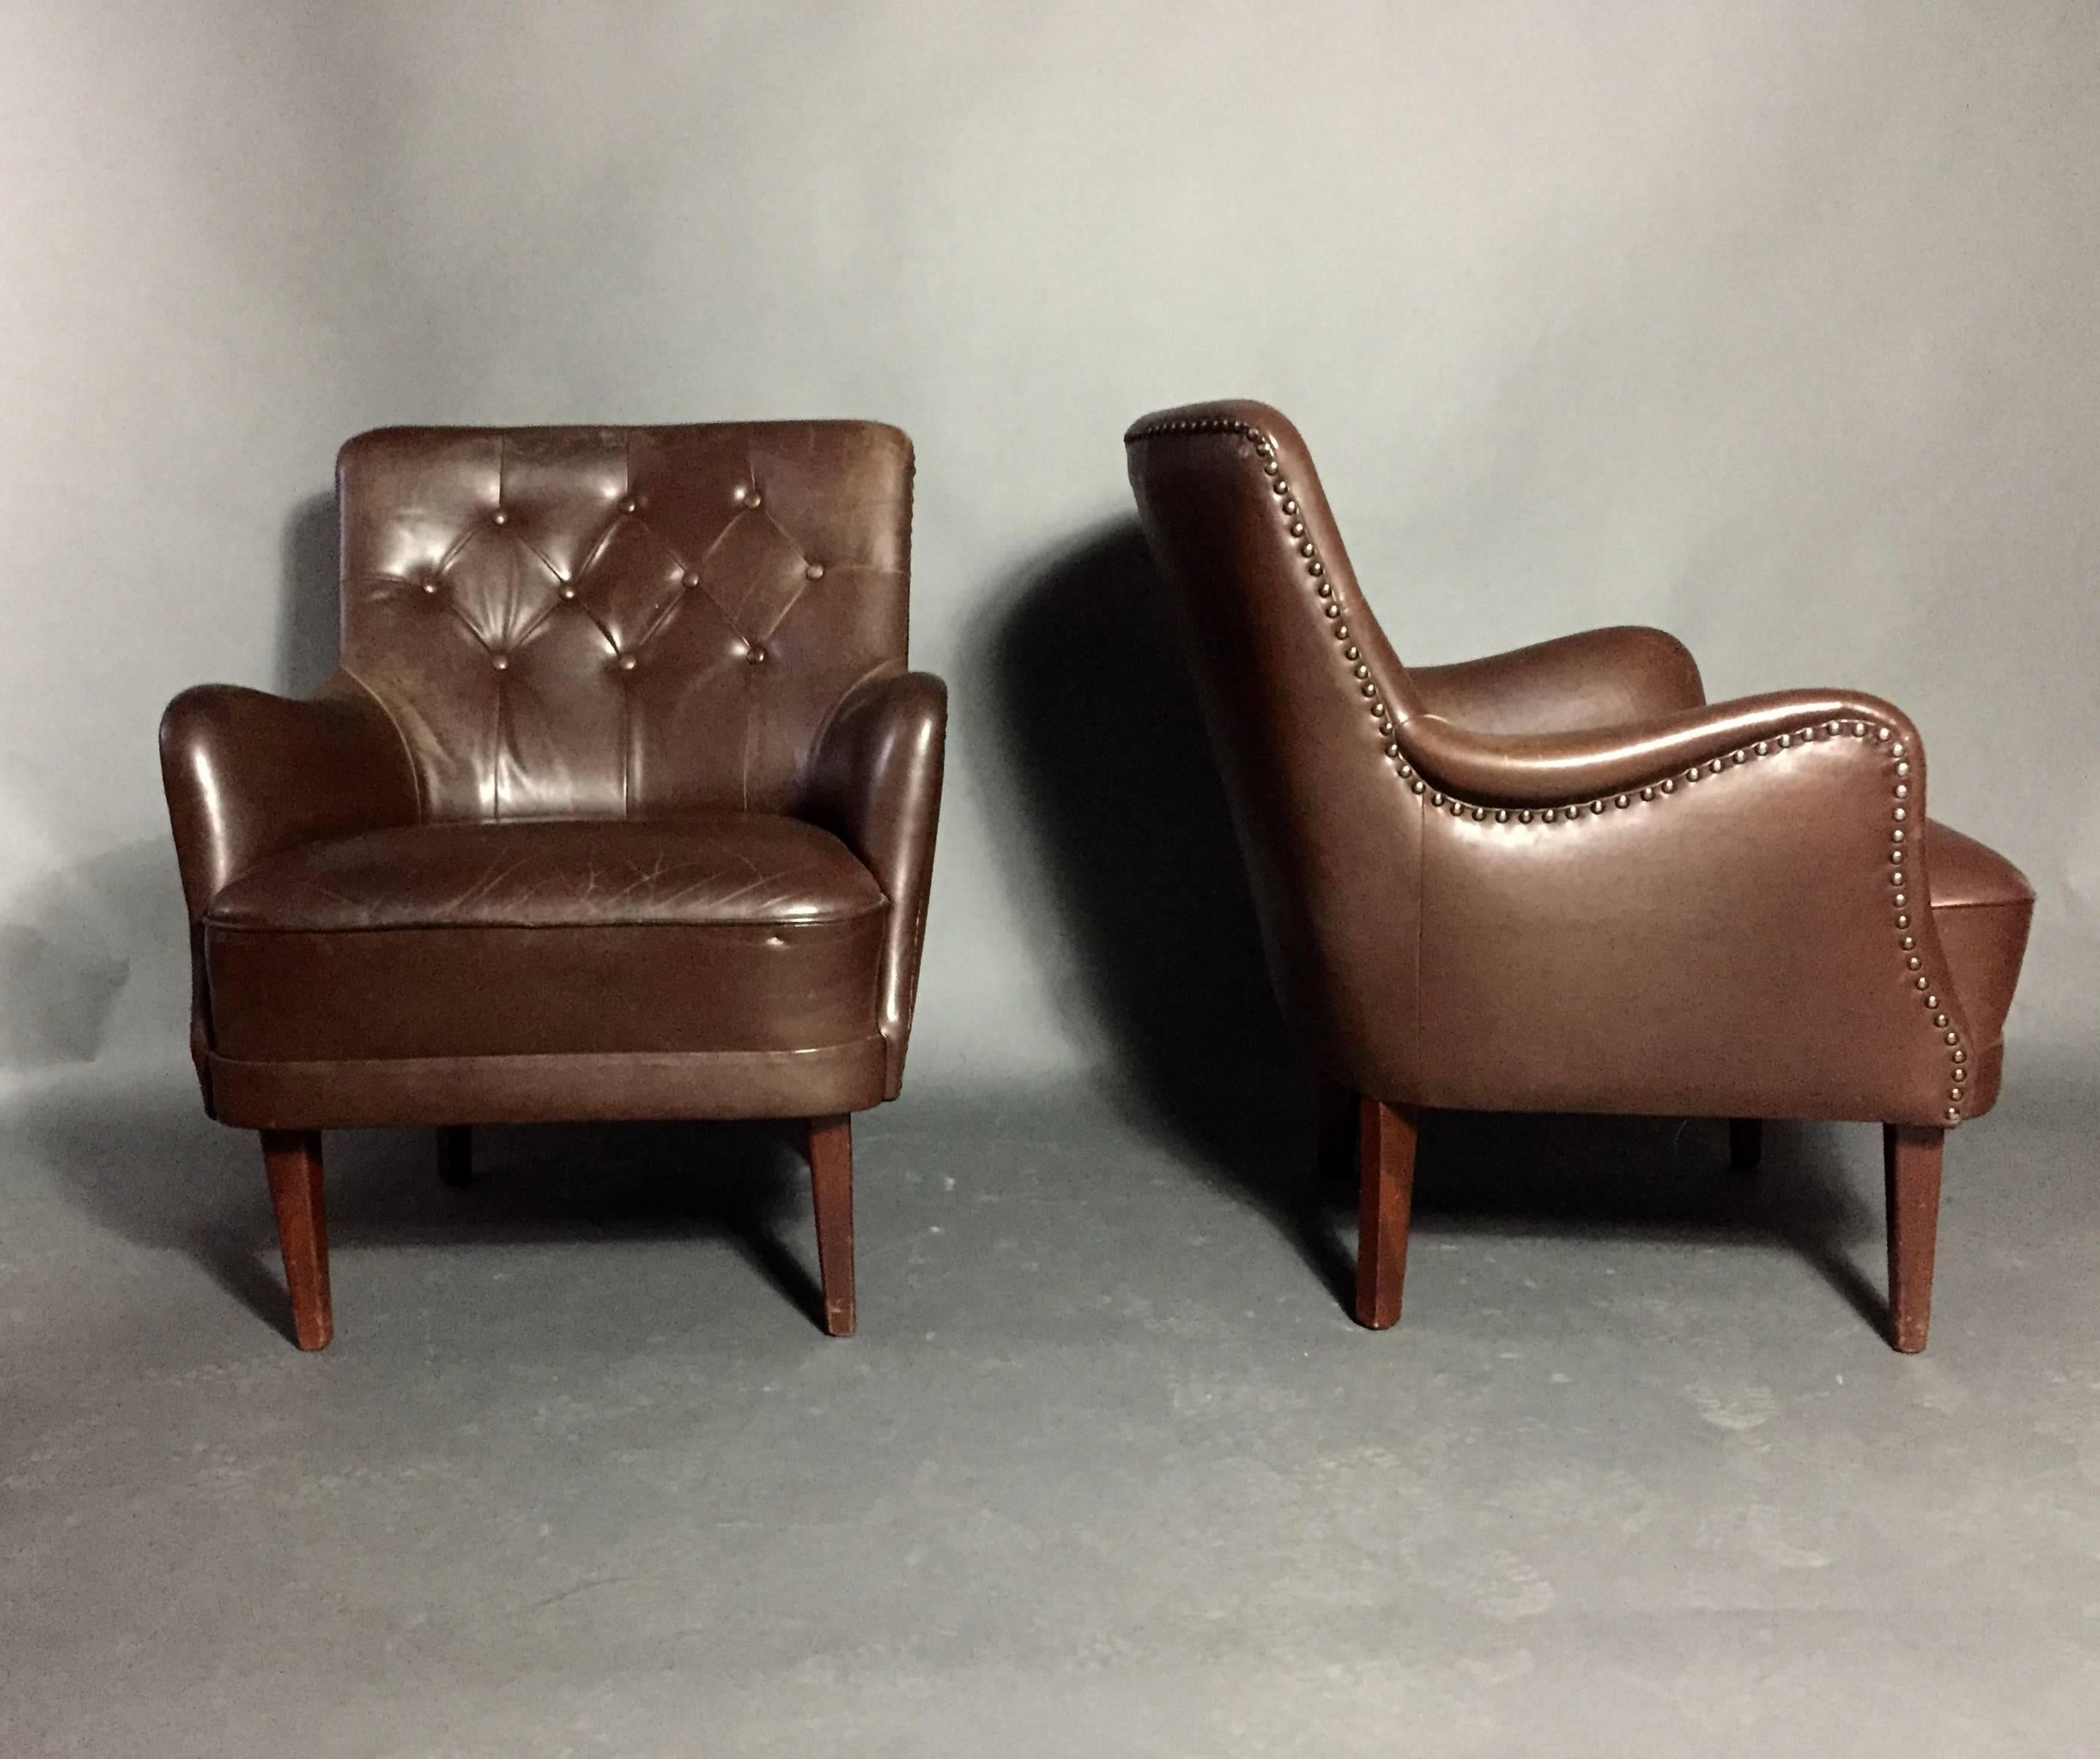 Scandinavian Modern Pair of 1950s Danish Buttoned Leather Lounge Chairs